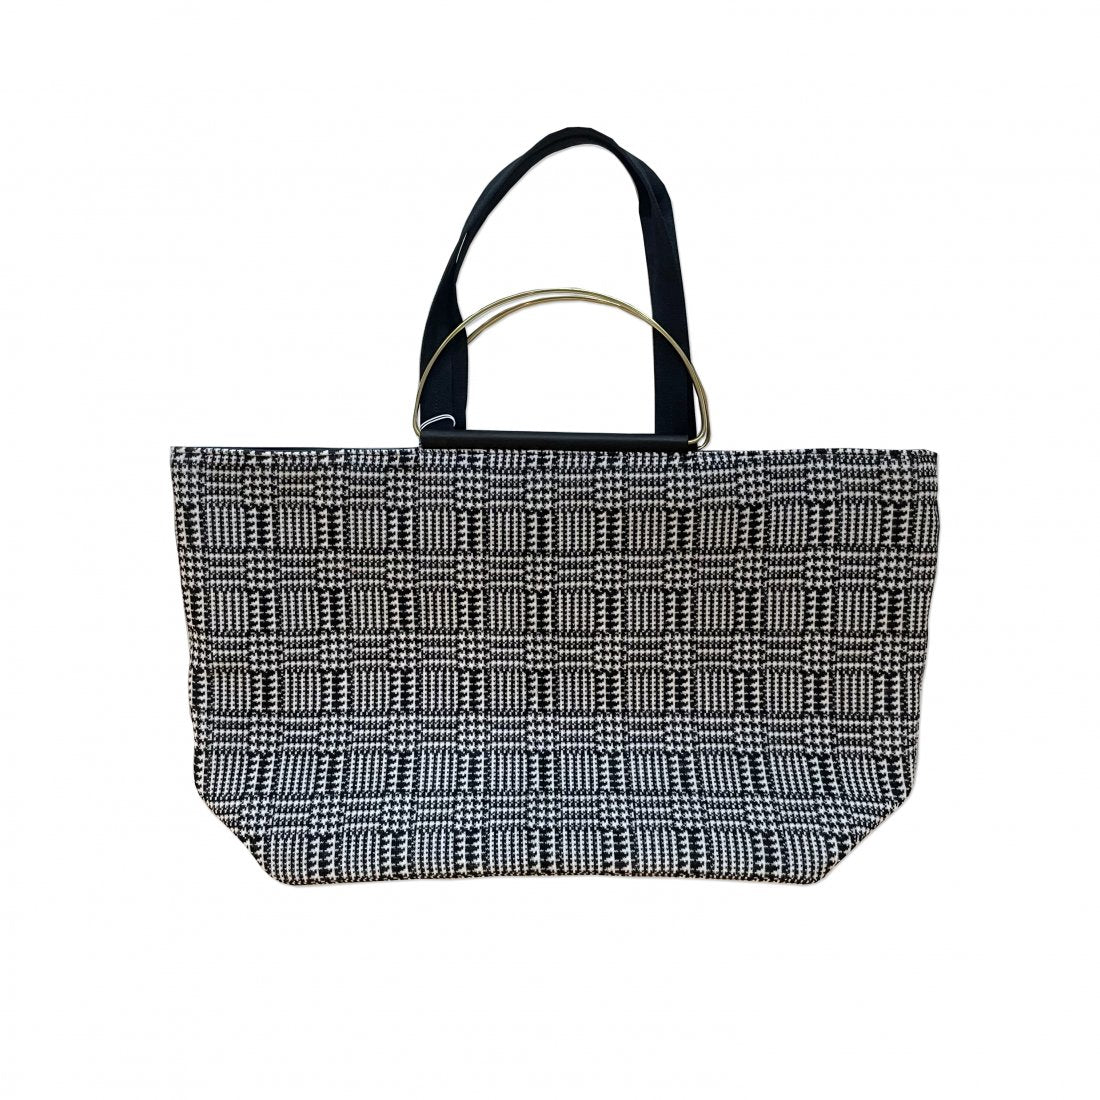 texnh/BRASS HANDLE TOTE(INLAY KNIT)